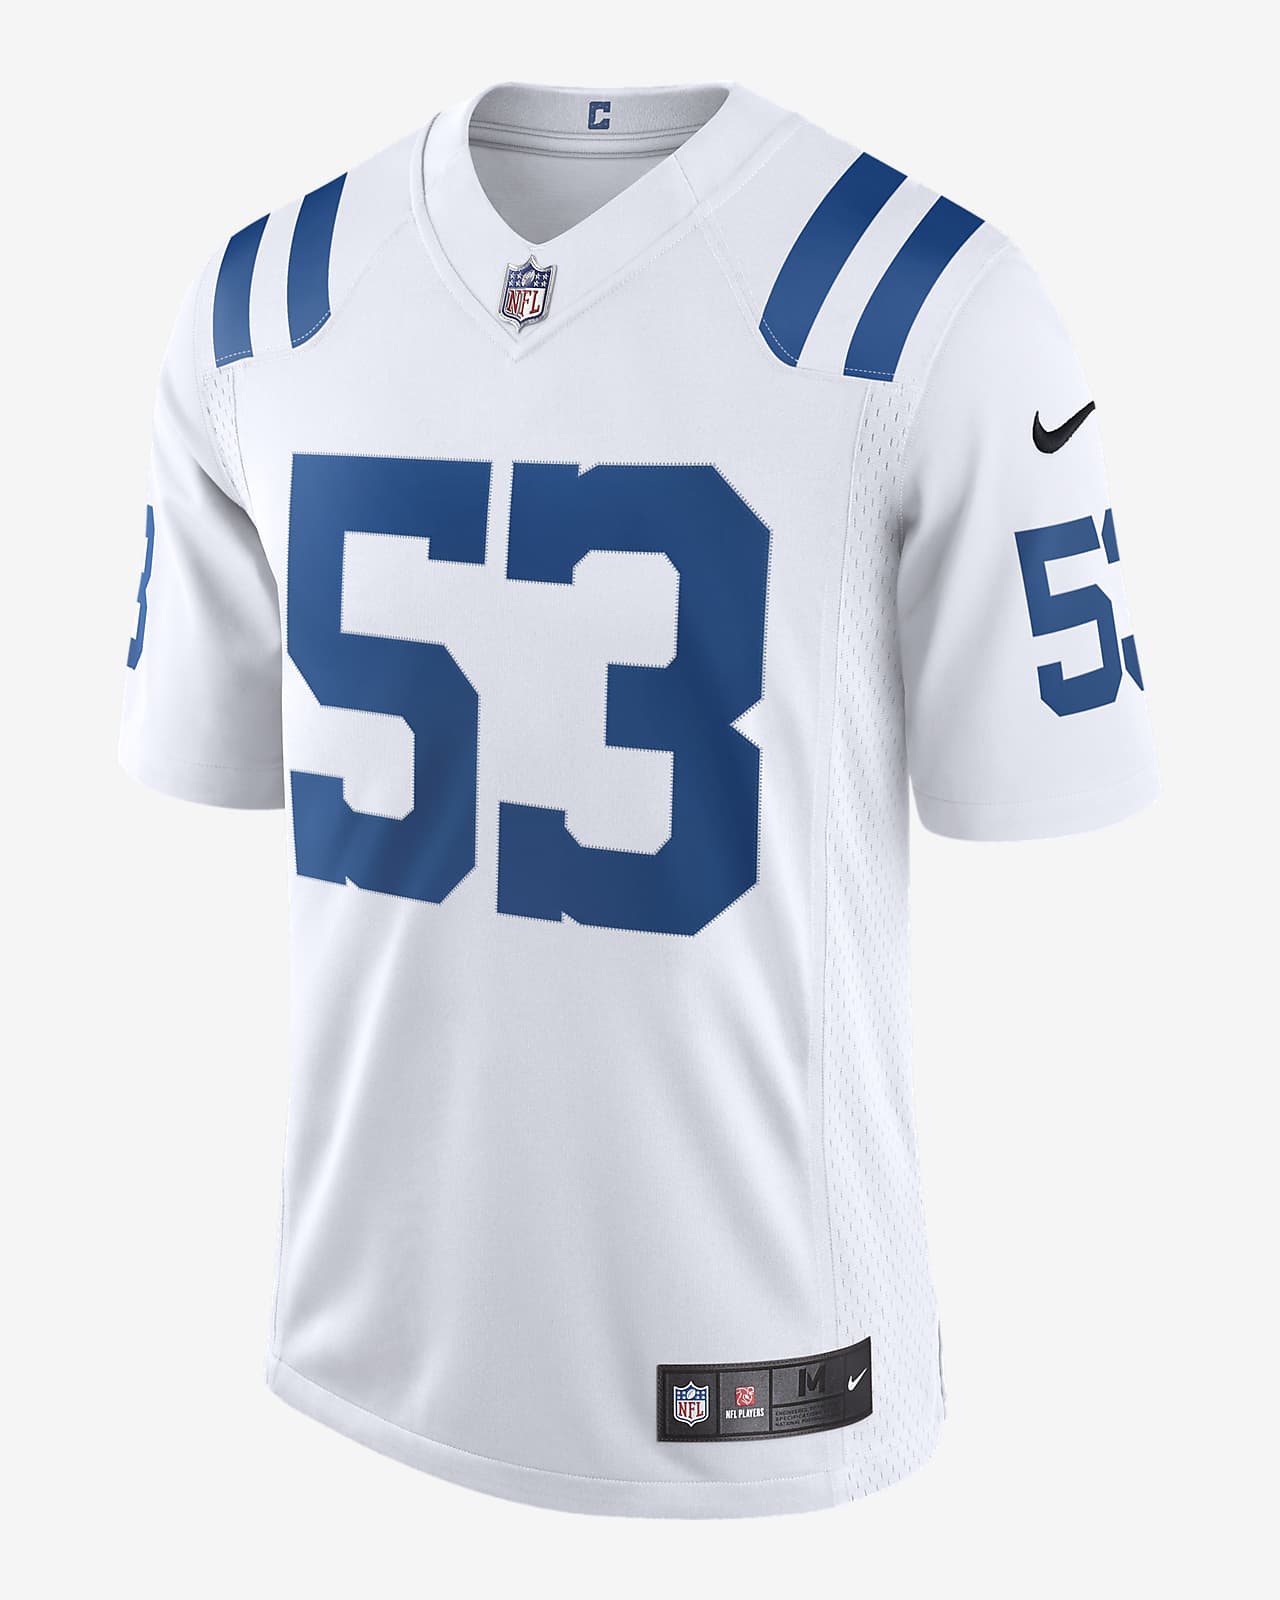 nfl blue and white jersey